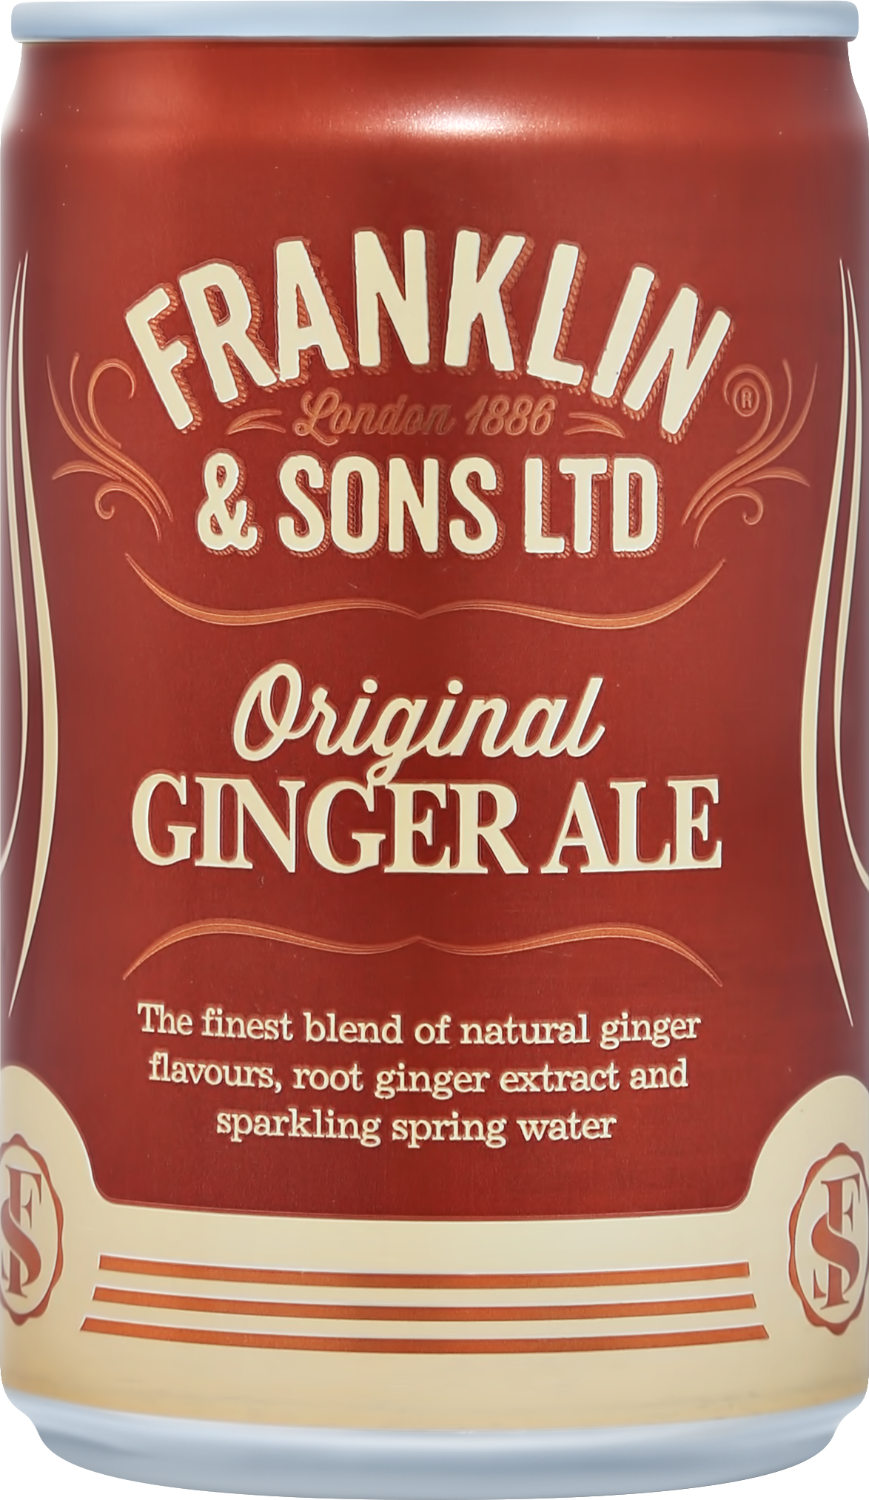 franklin and sons mallorcan tonic water Franklin and Sons Original Ginger Ale